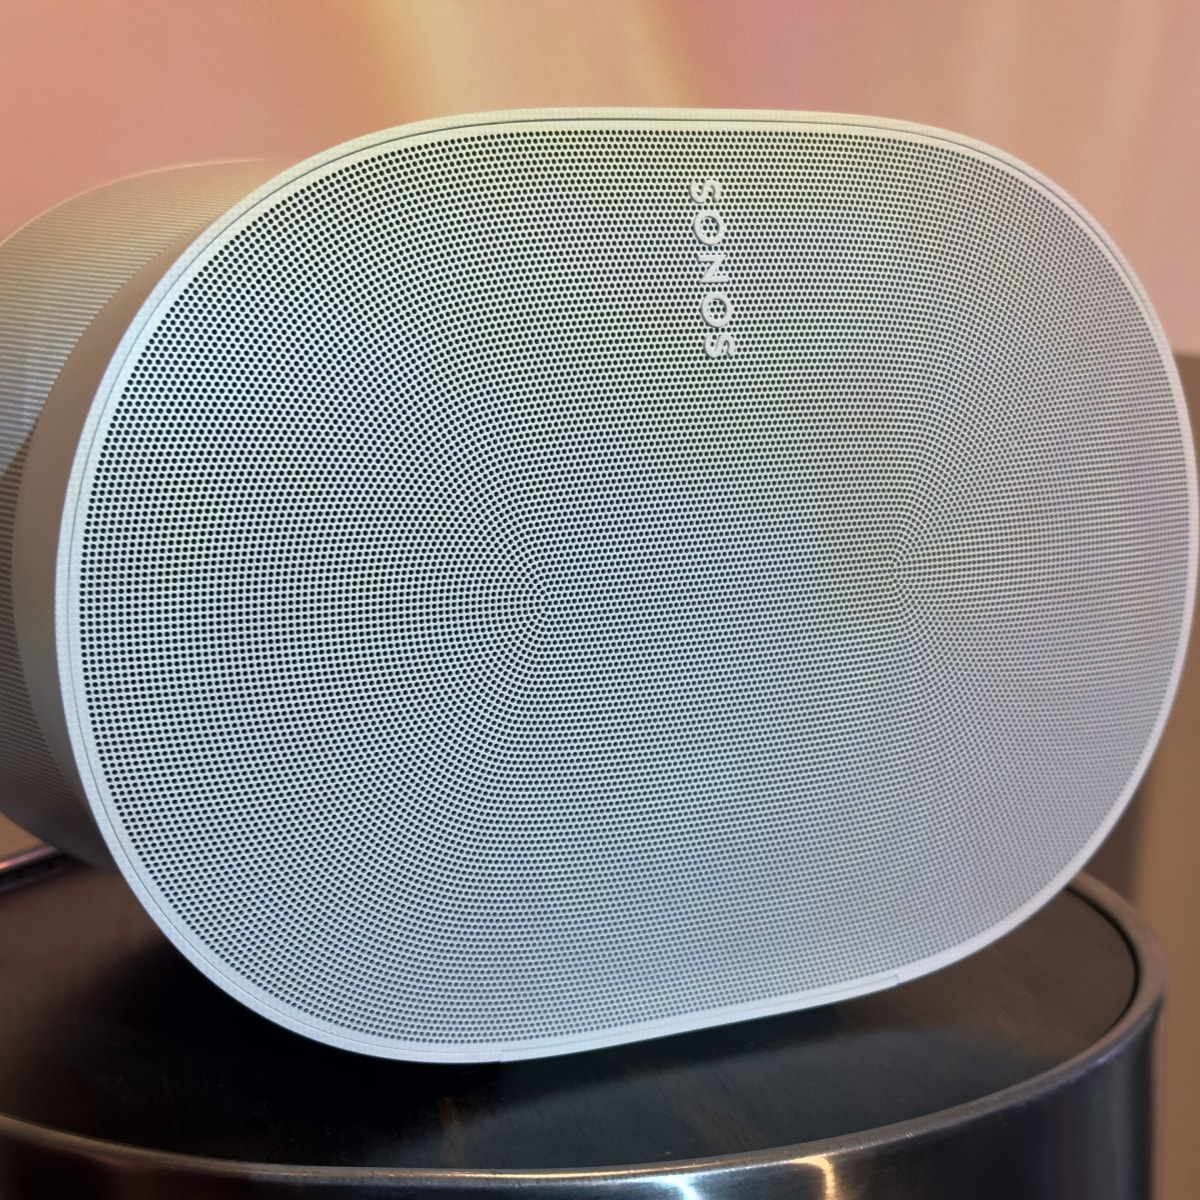 Sonos Era 100 smart speaker review: An Upgrade on Nearly All Fronts - My  Site